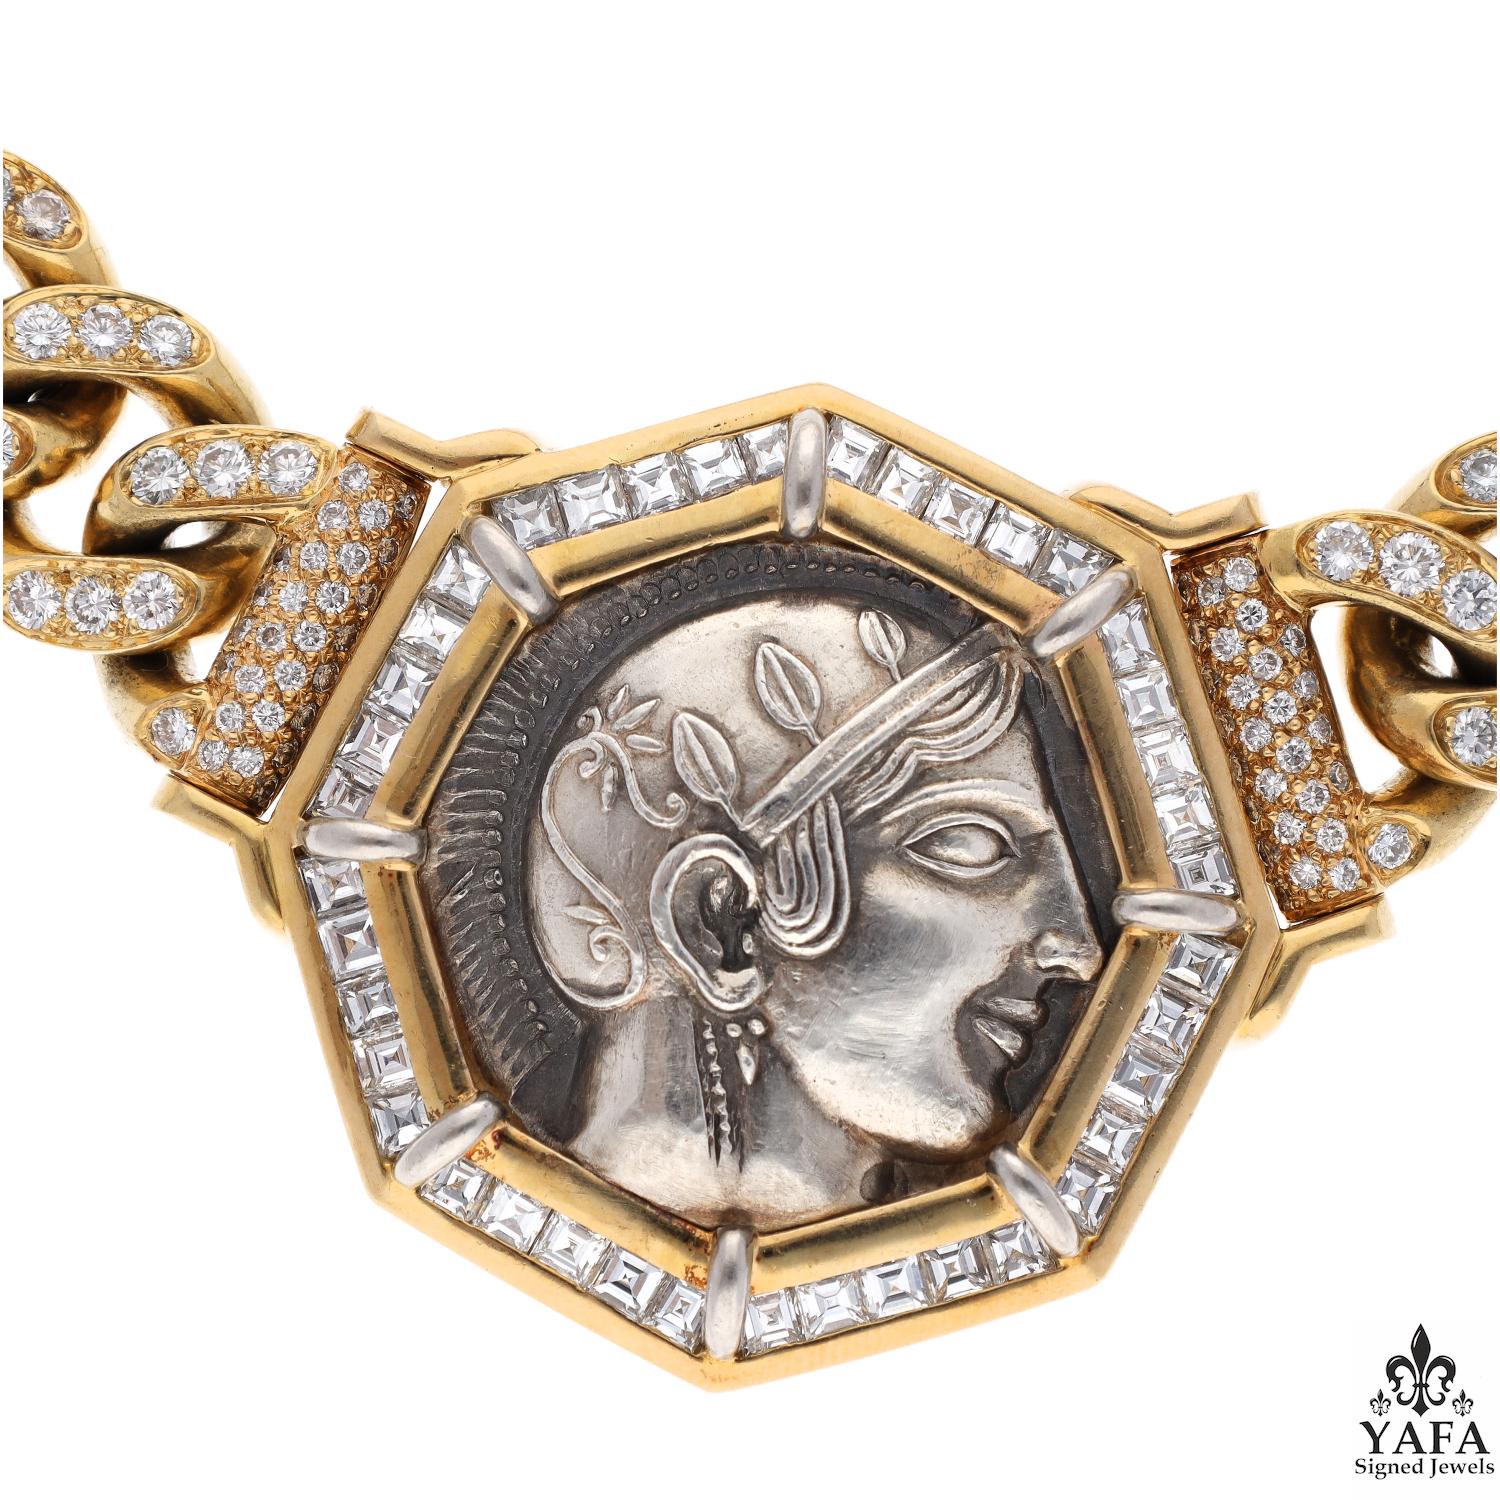 Unique Bvlgari Rome Vintage Ancient Greek Coin Full Diamond Set Gold Curb Link Necklace From Our Signed Jewels Vintage Collection.
Bulgari Rome set the trend in the 1970s for mounting Ancient to Modern coins in substantial gold jewelry.  Our Vintage